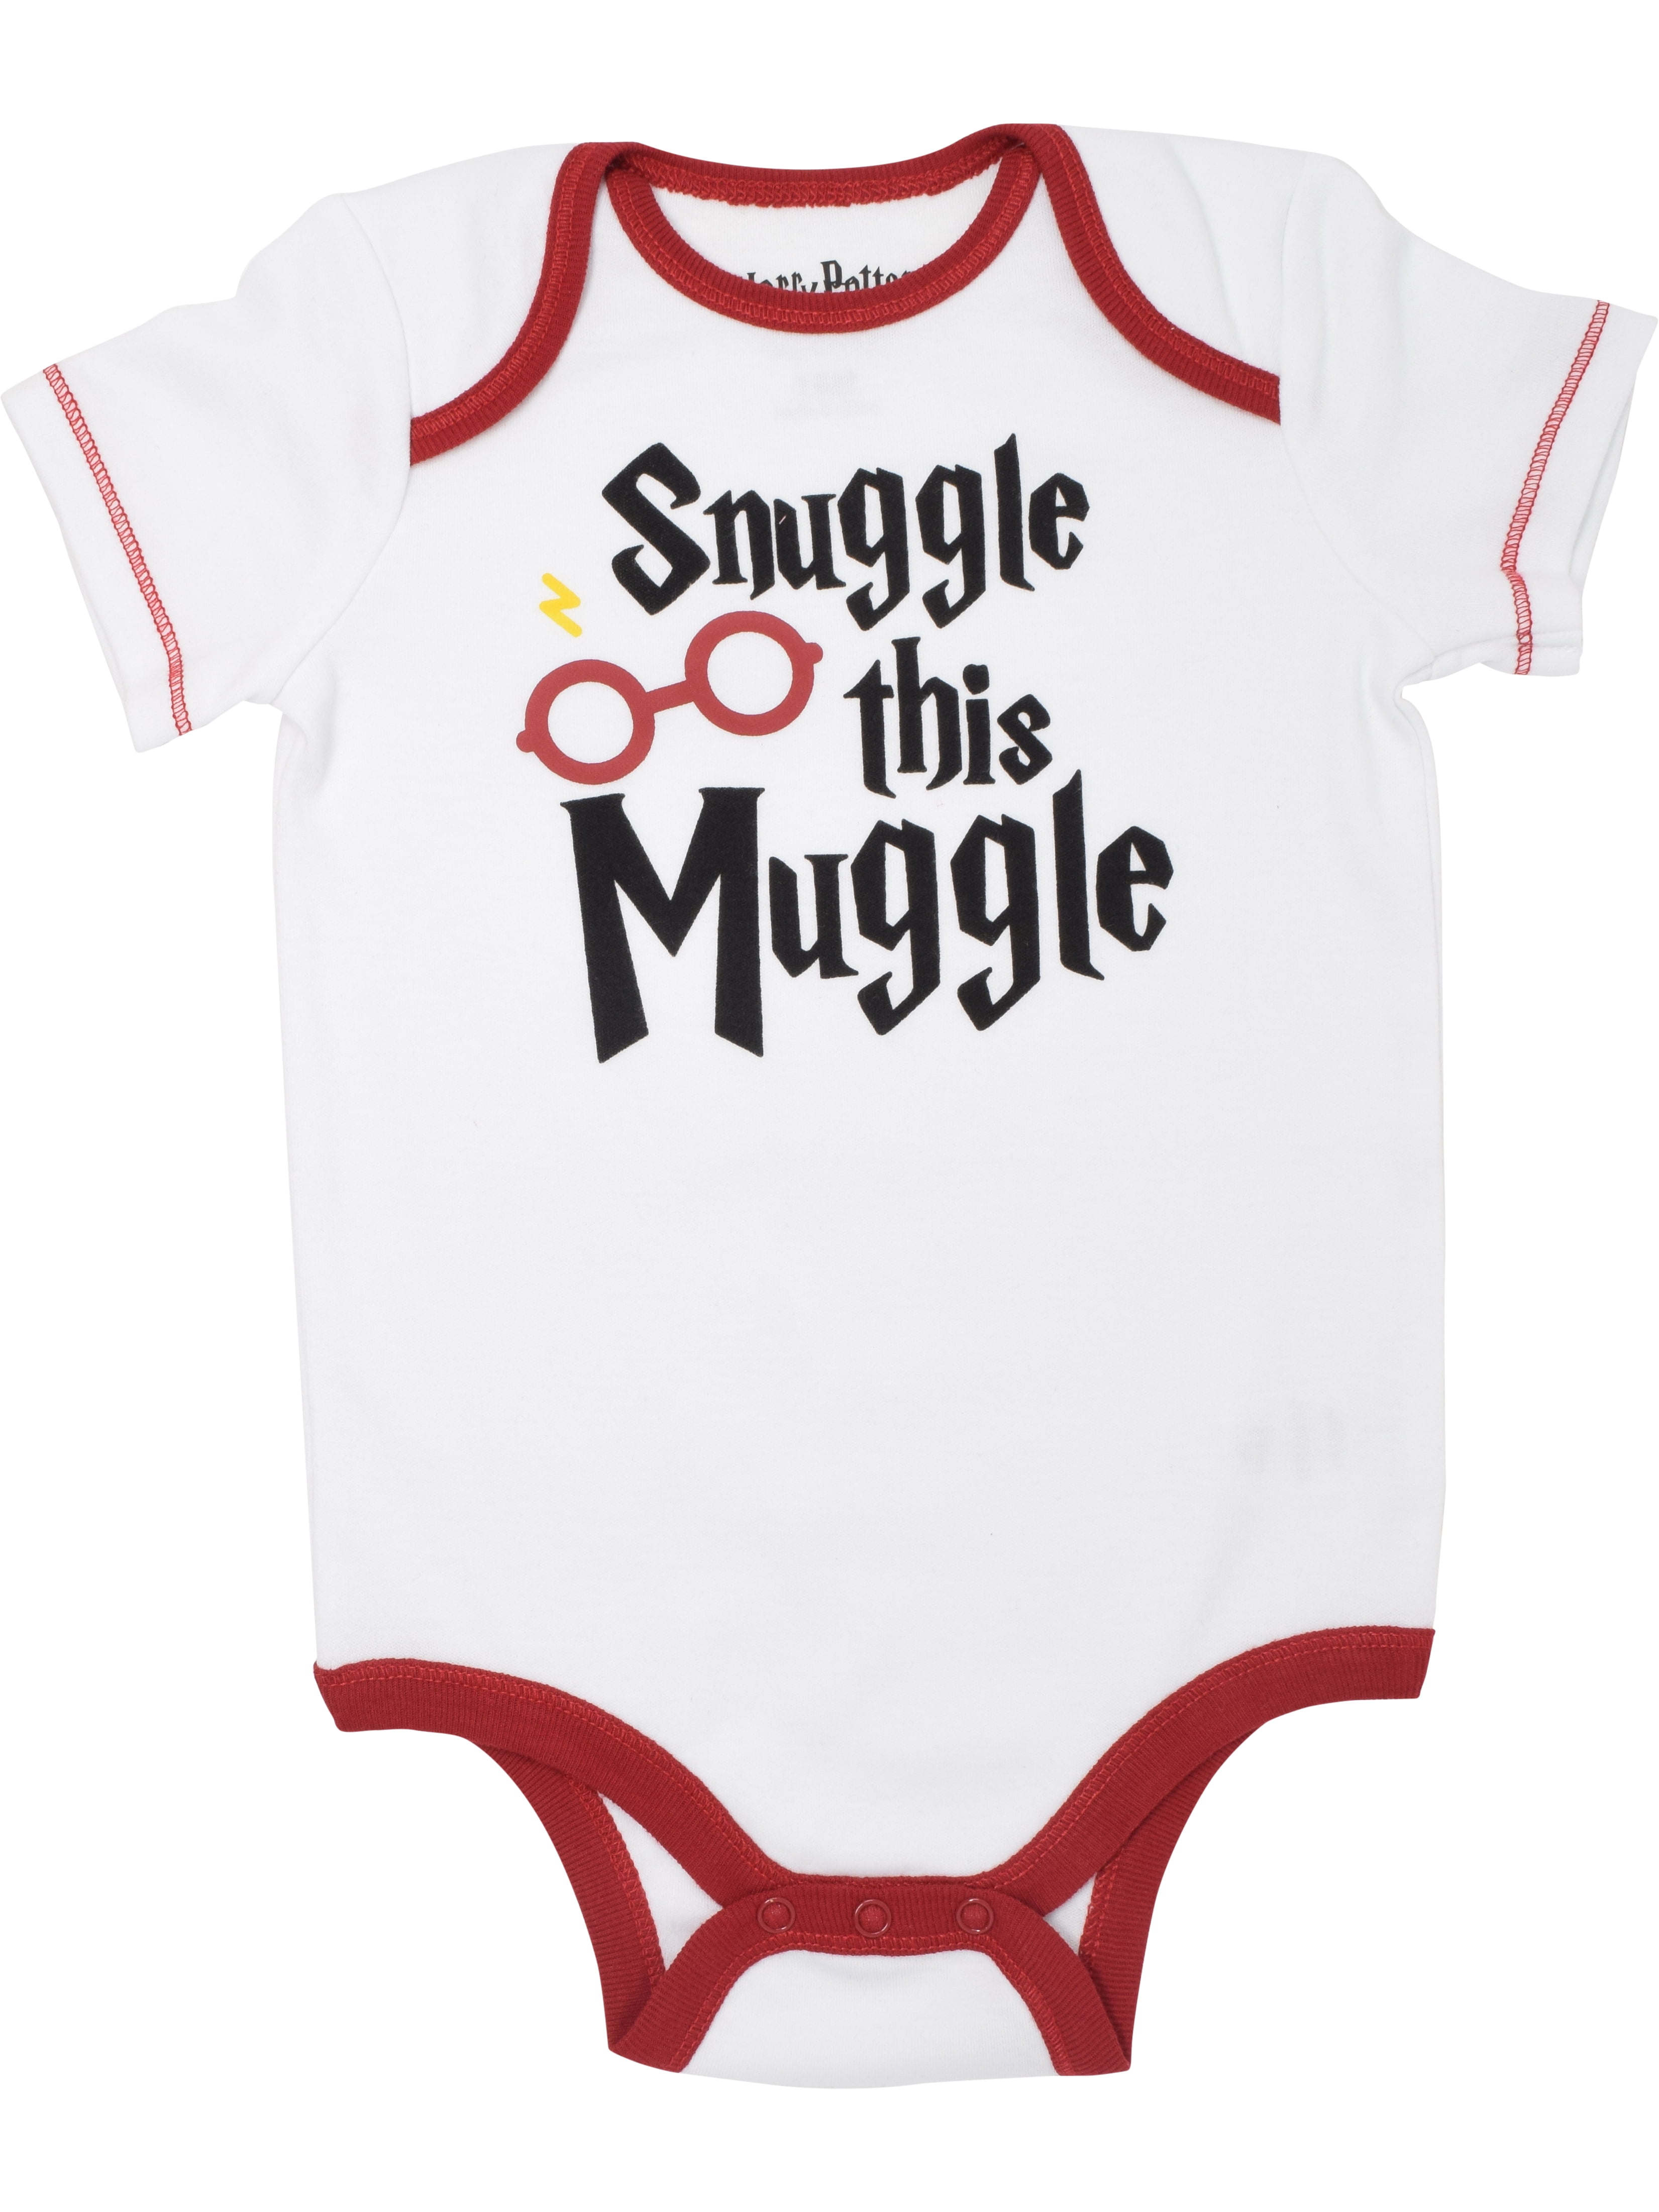 Harry Potter Baby Boys Layette Clothing Set Bodysuit Pants with Footies /& Hat